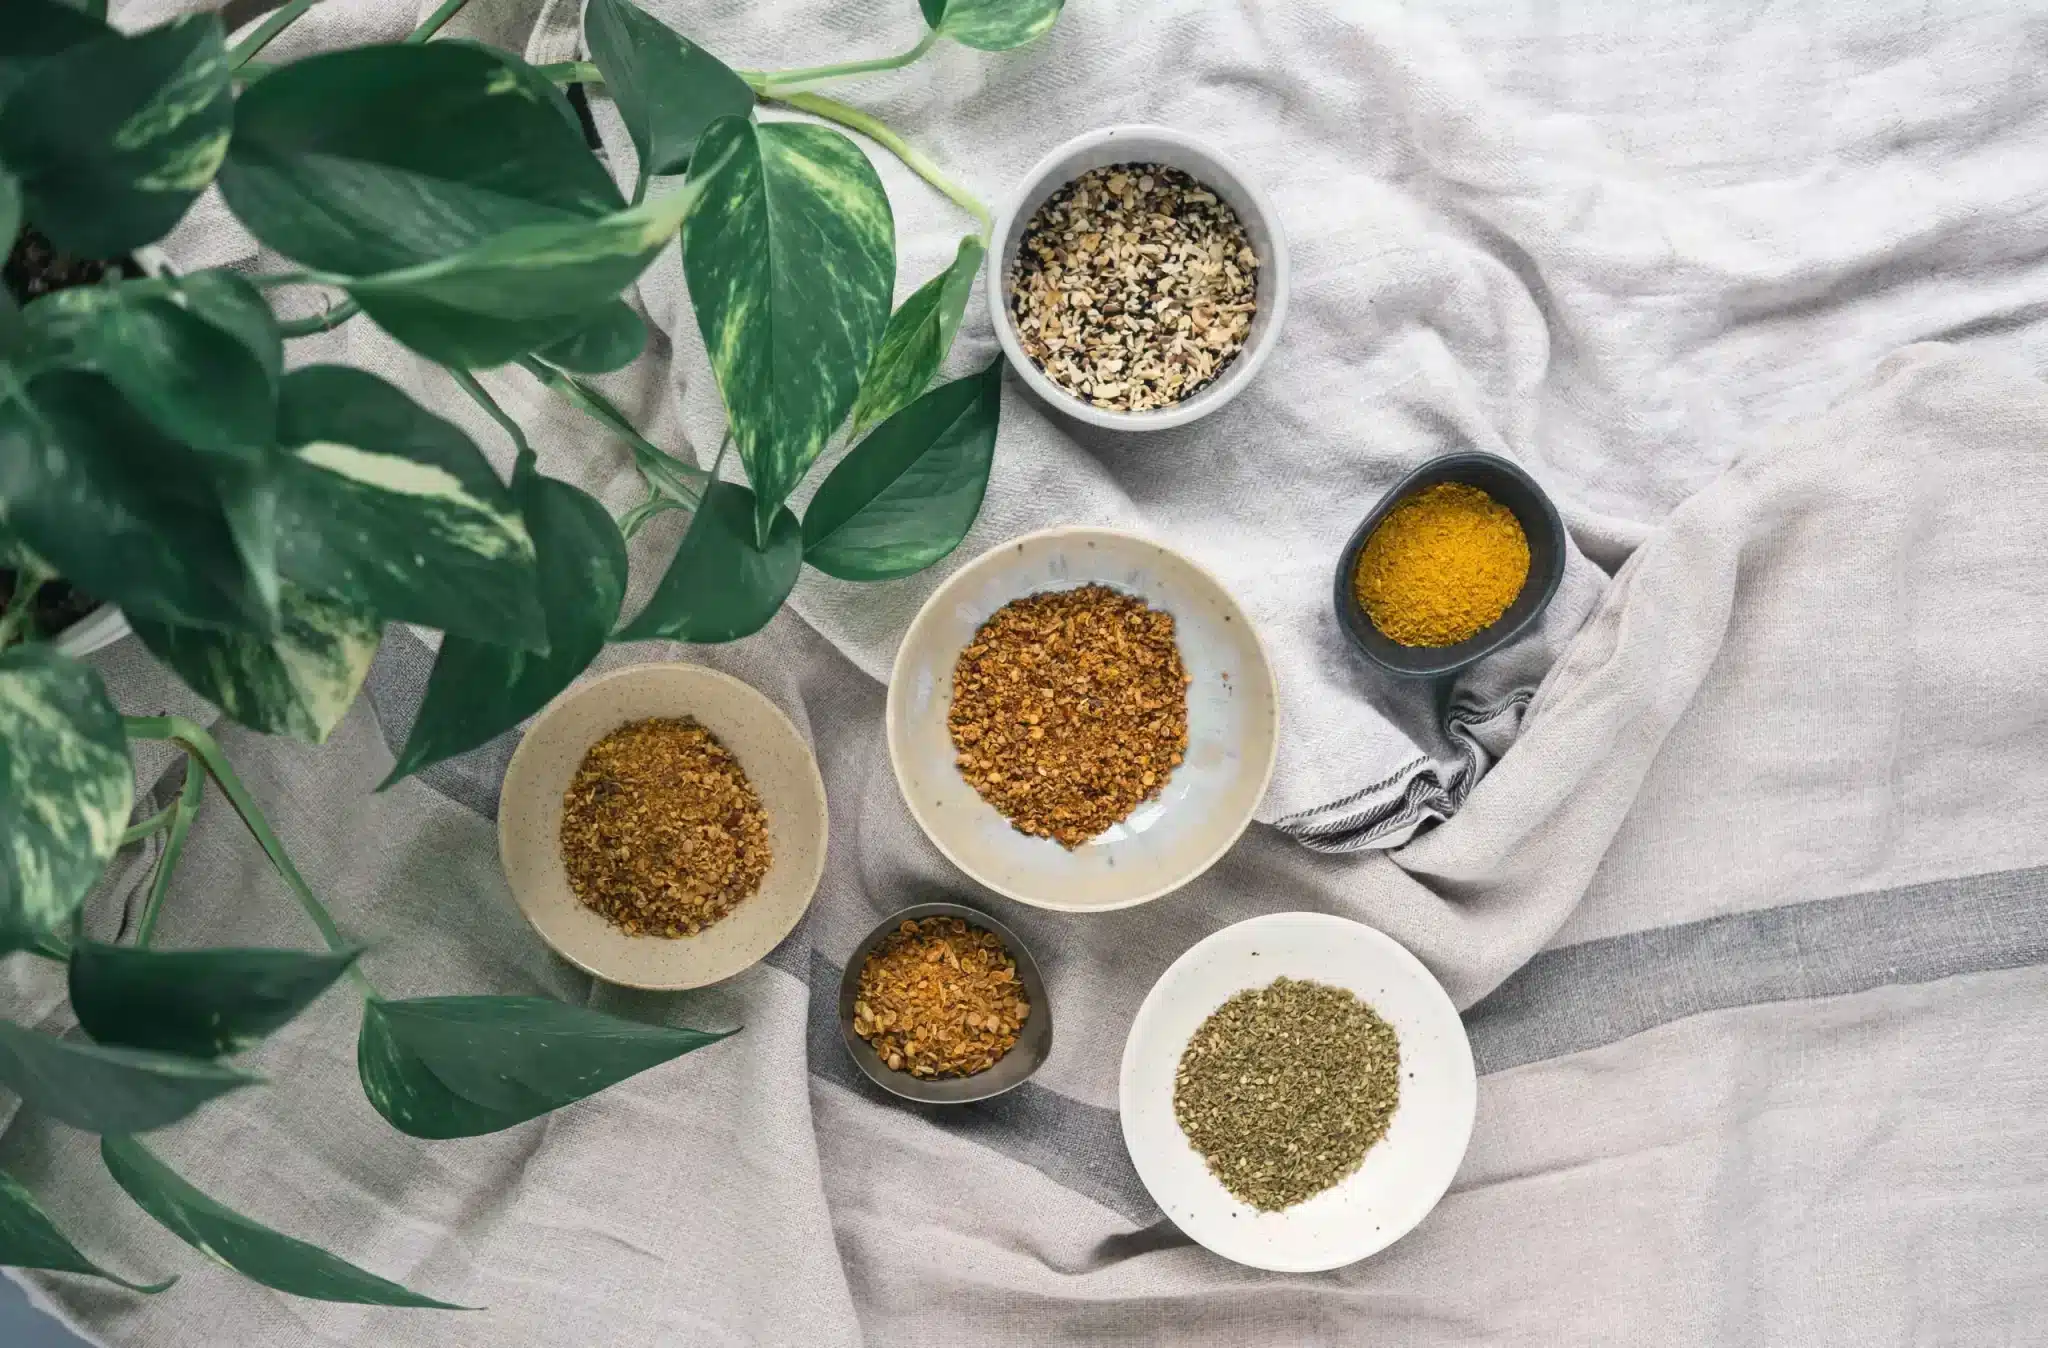 An overhead view of various spices arranged in bowls on a linen cloth, accompanied by the fresh green leaves of a potted plant. The spices include whole seeds, ground yellow powder, and mixed dried herbs, presenting a natural palette of colors and textures.